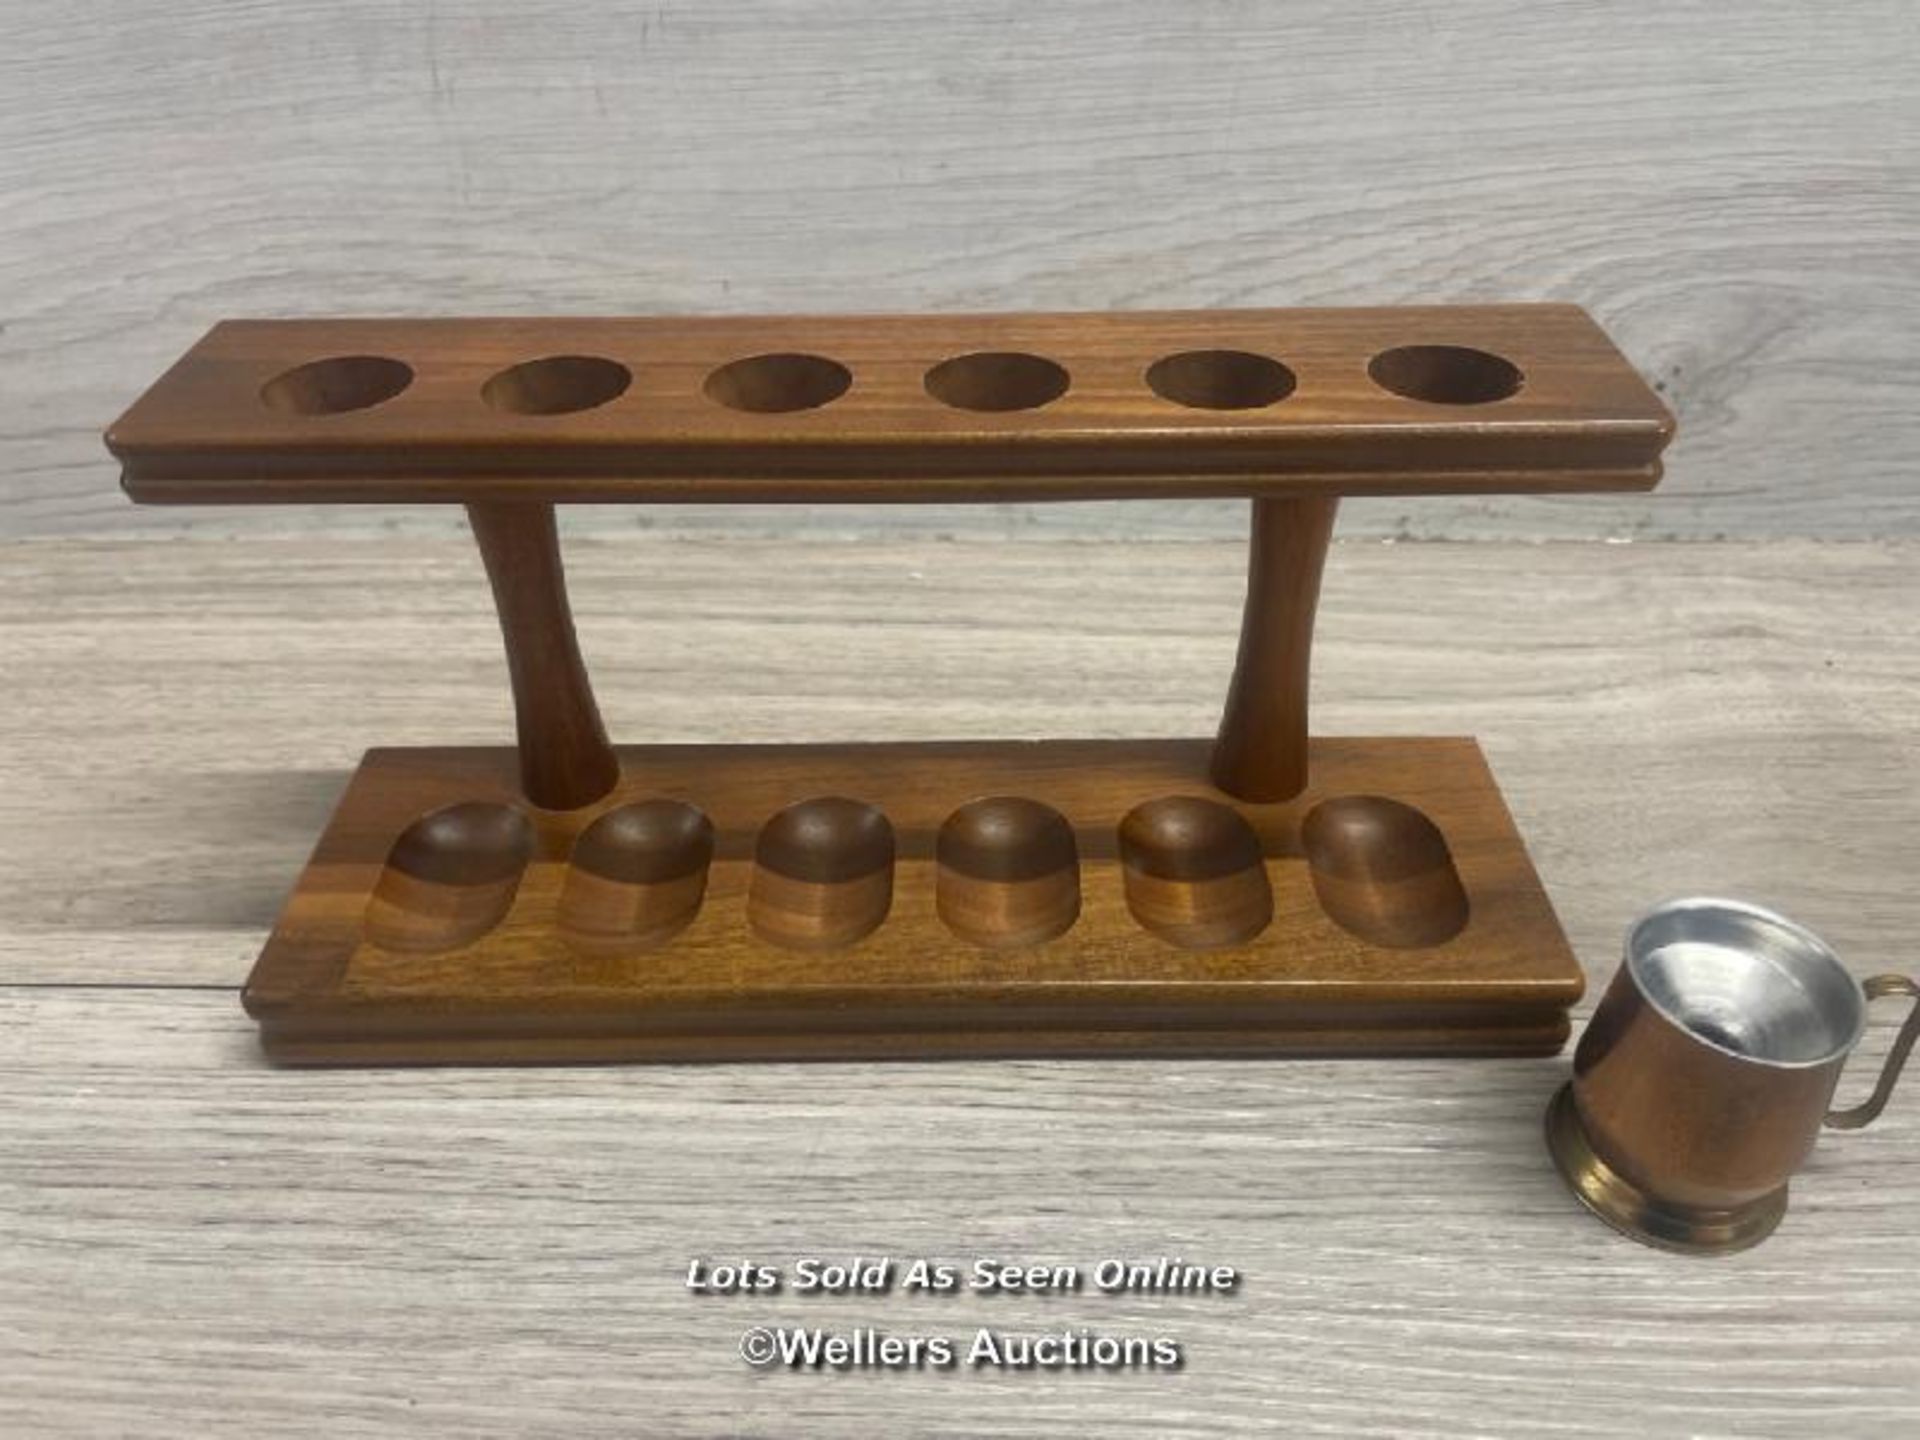 *SMALL SMOKING PIPE DISPLAY STAND AND TOBACCO POT